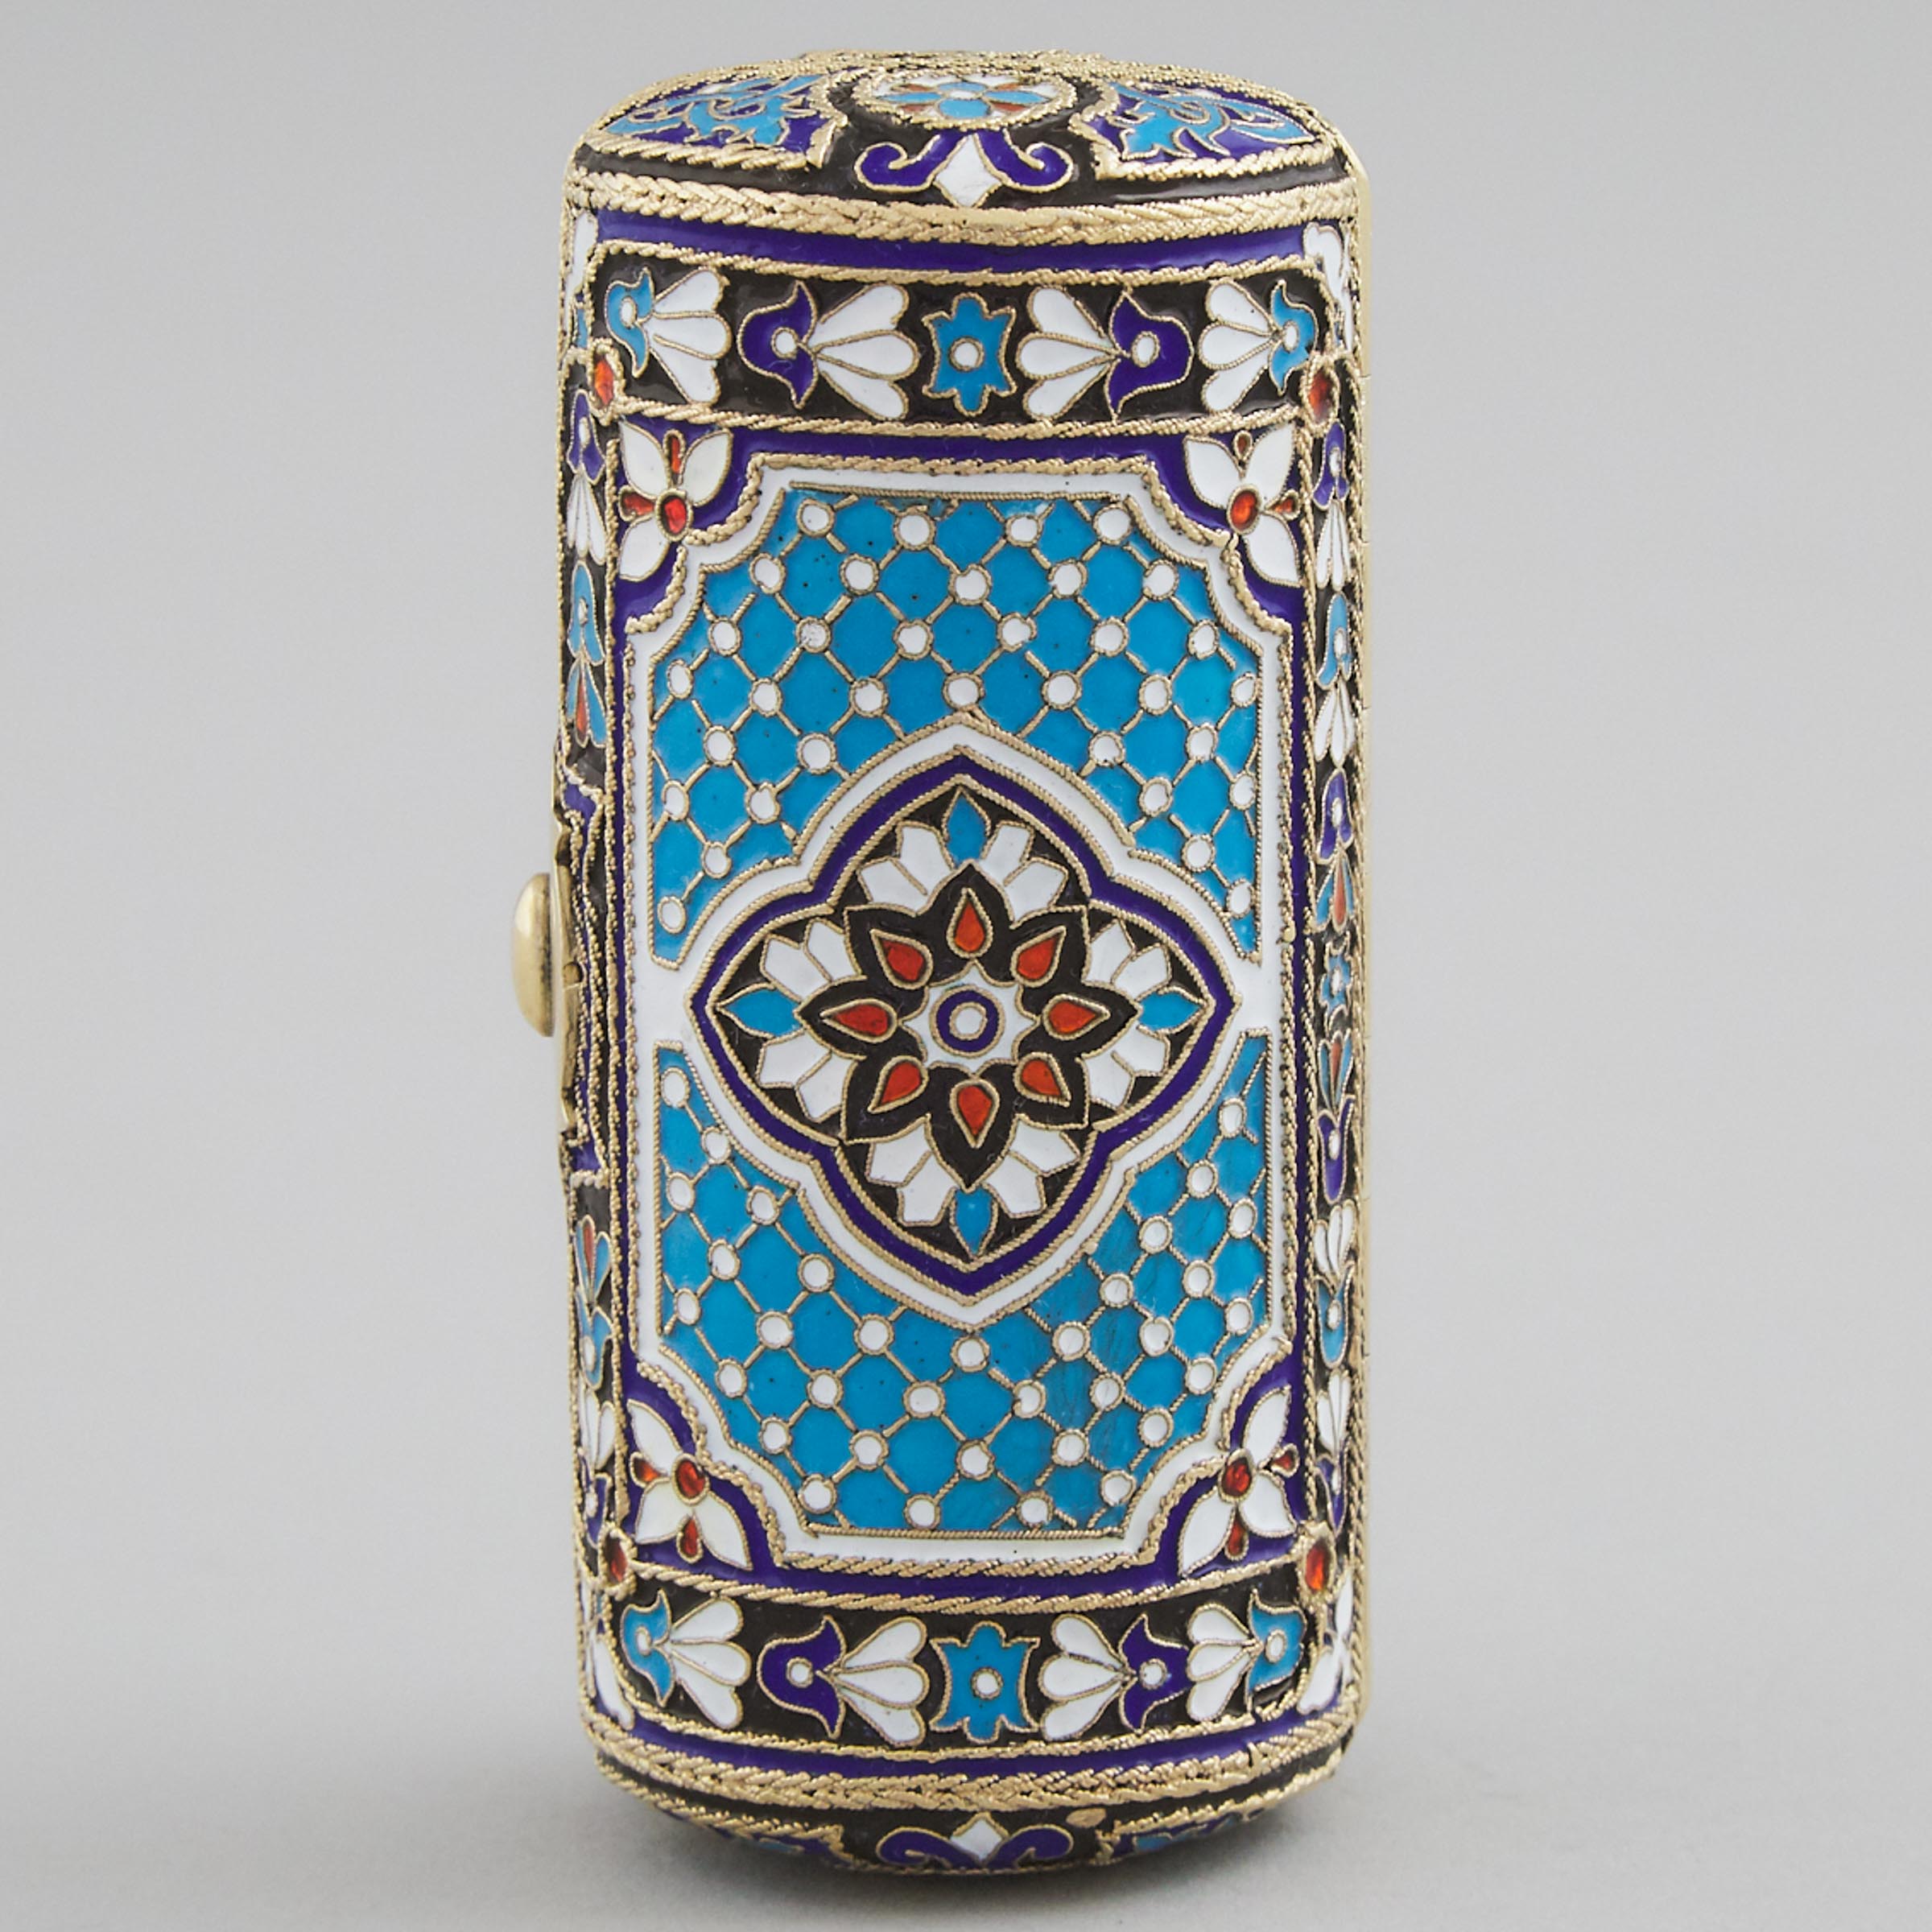 Russian Silver and Cloisonné Enamel Cylindrical Cigarette Case, Ivan Khlebnikov, Moscow, 1883(?)